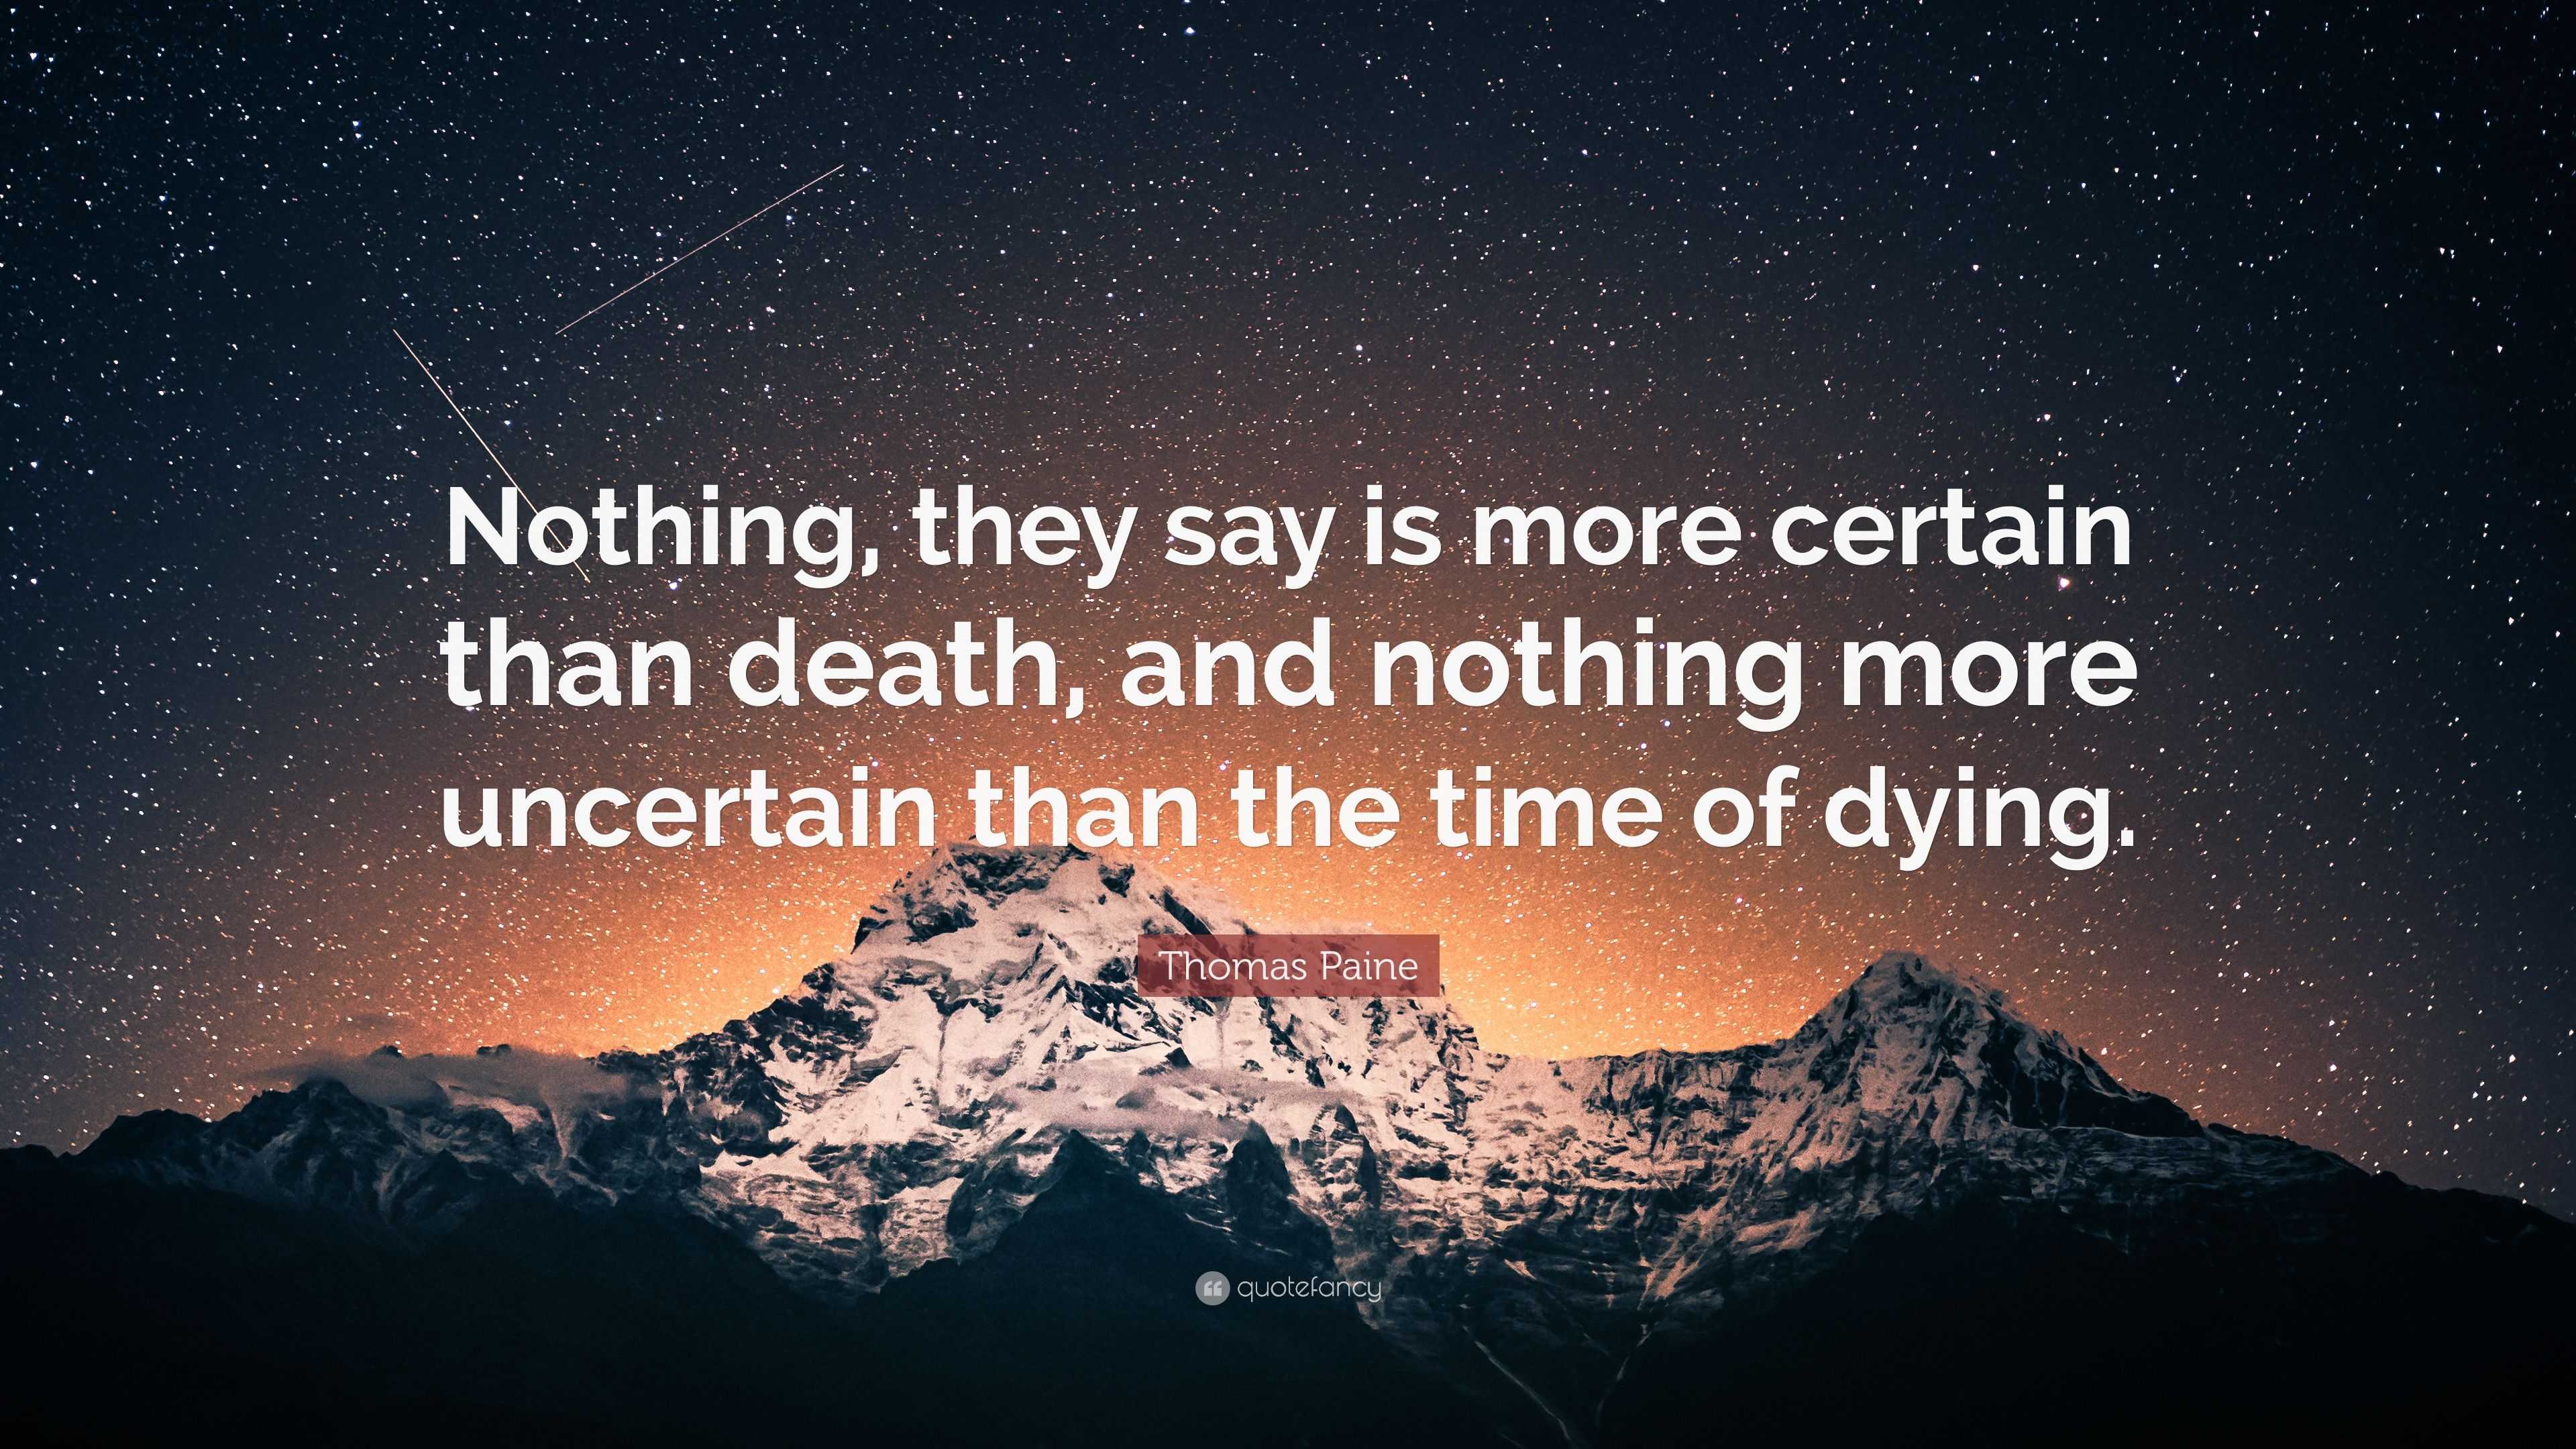 Thomas Paine Quote: say more certain than death, and nothing more uncertain